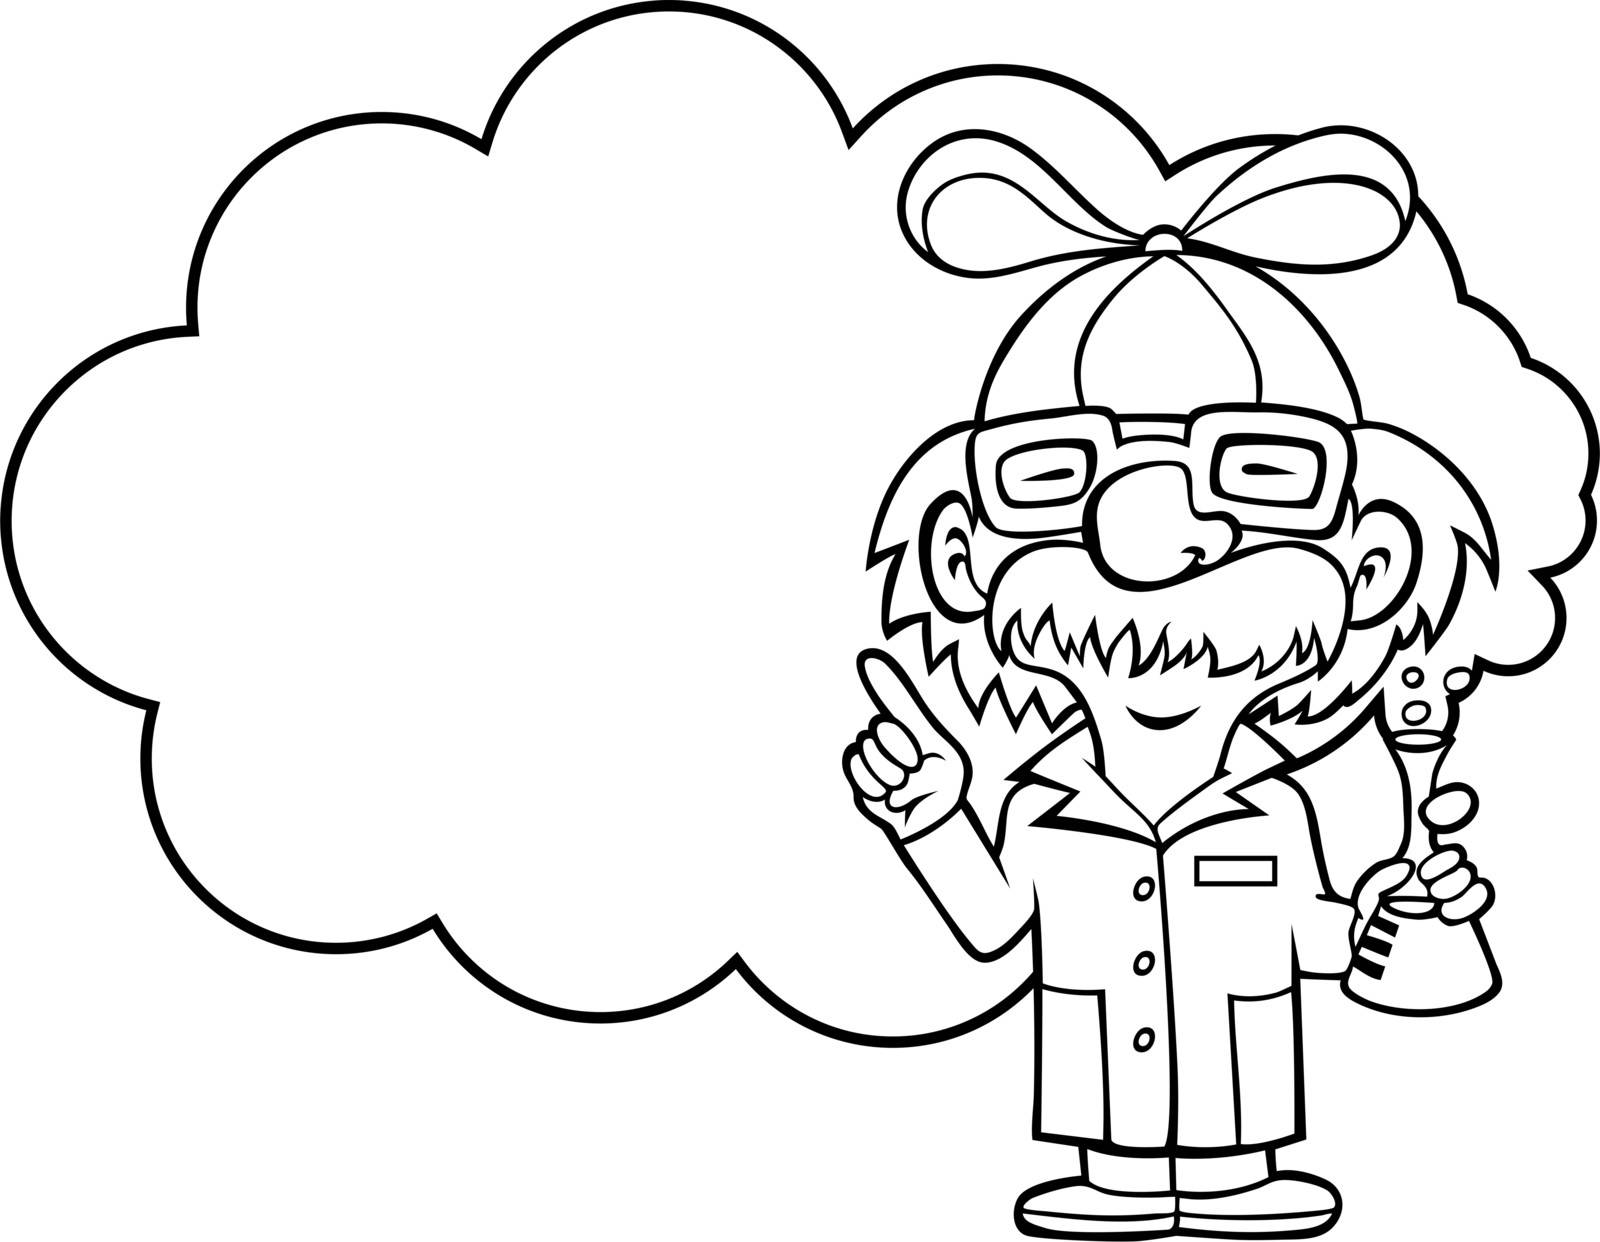 Cartoon of a scientist holding a flask and wearing a beanie with a propeller.